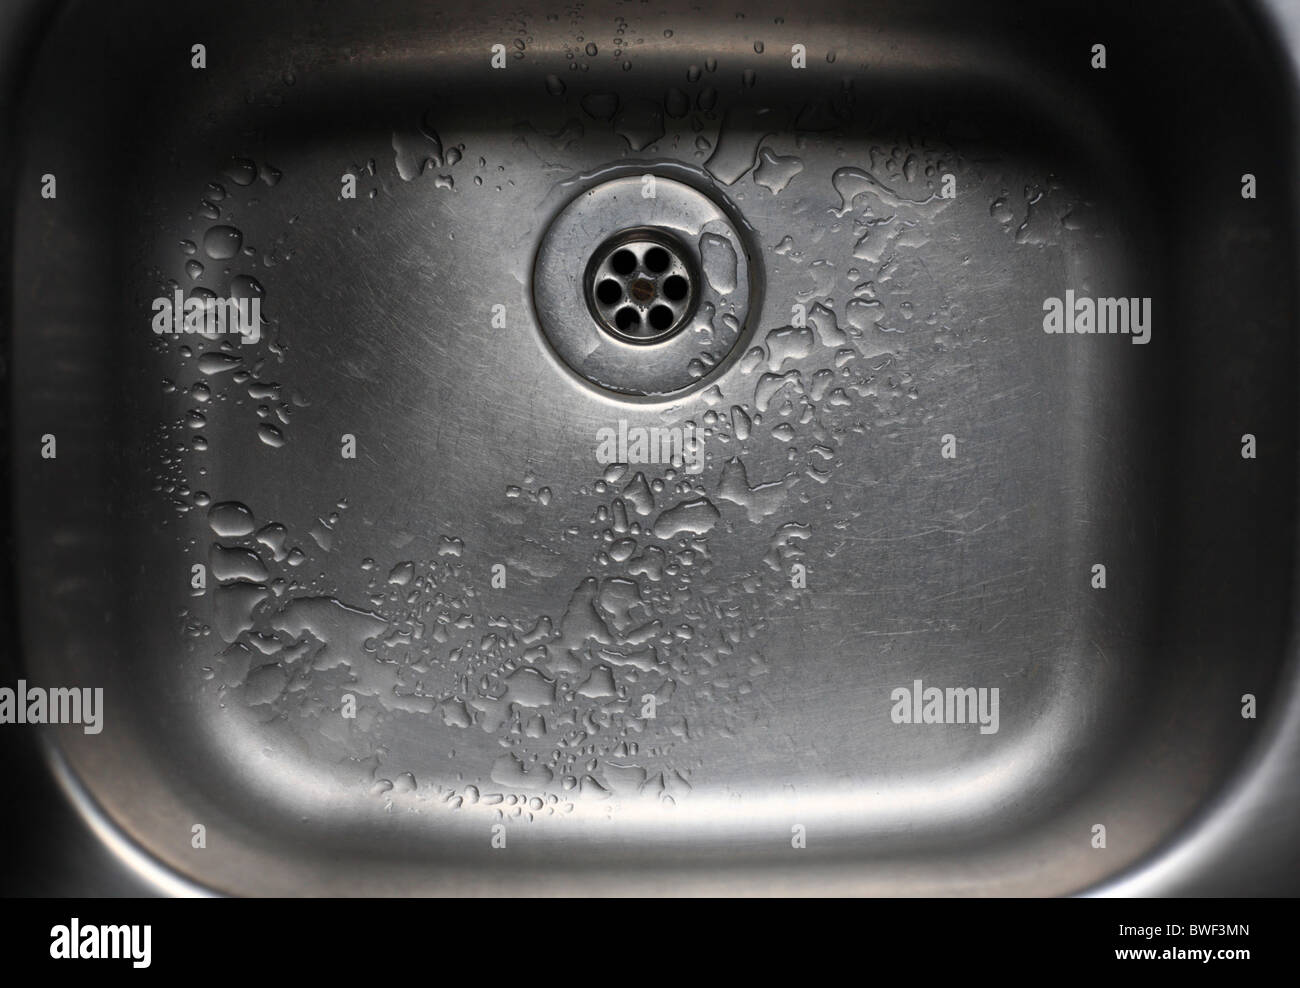 A stainless steel kitchen sink. Stock Photo